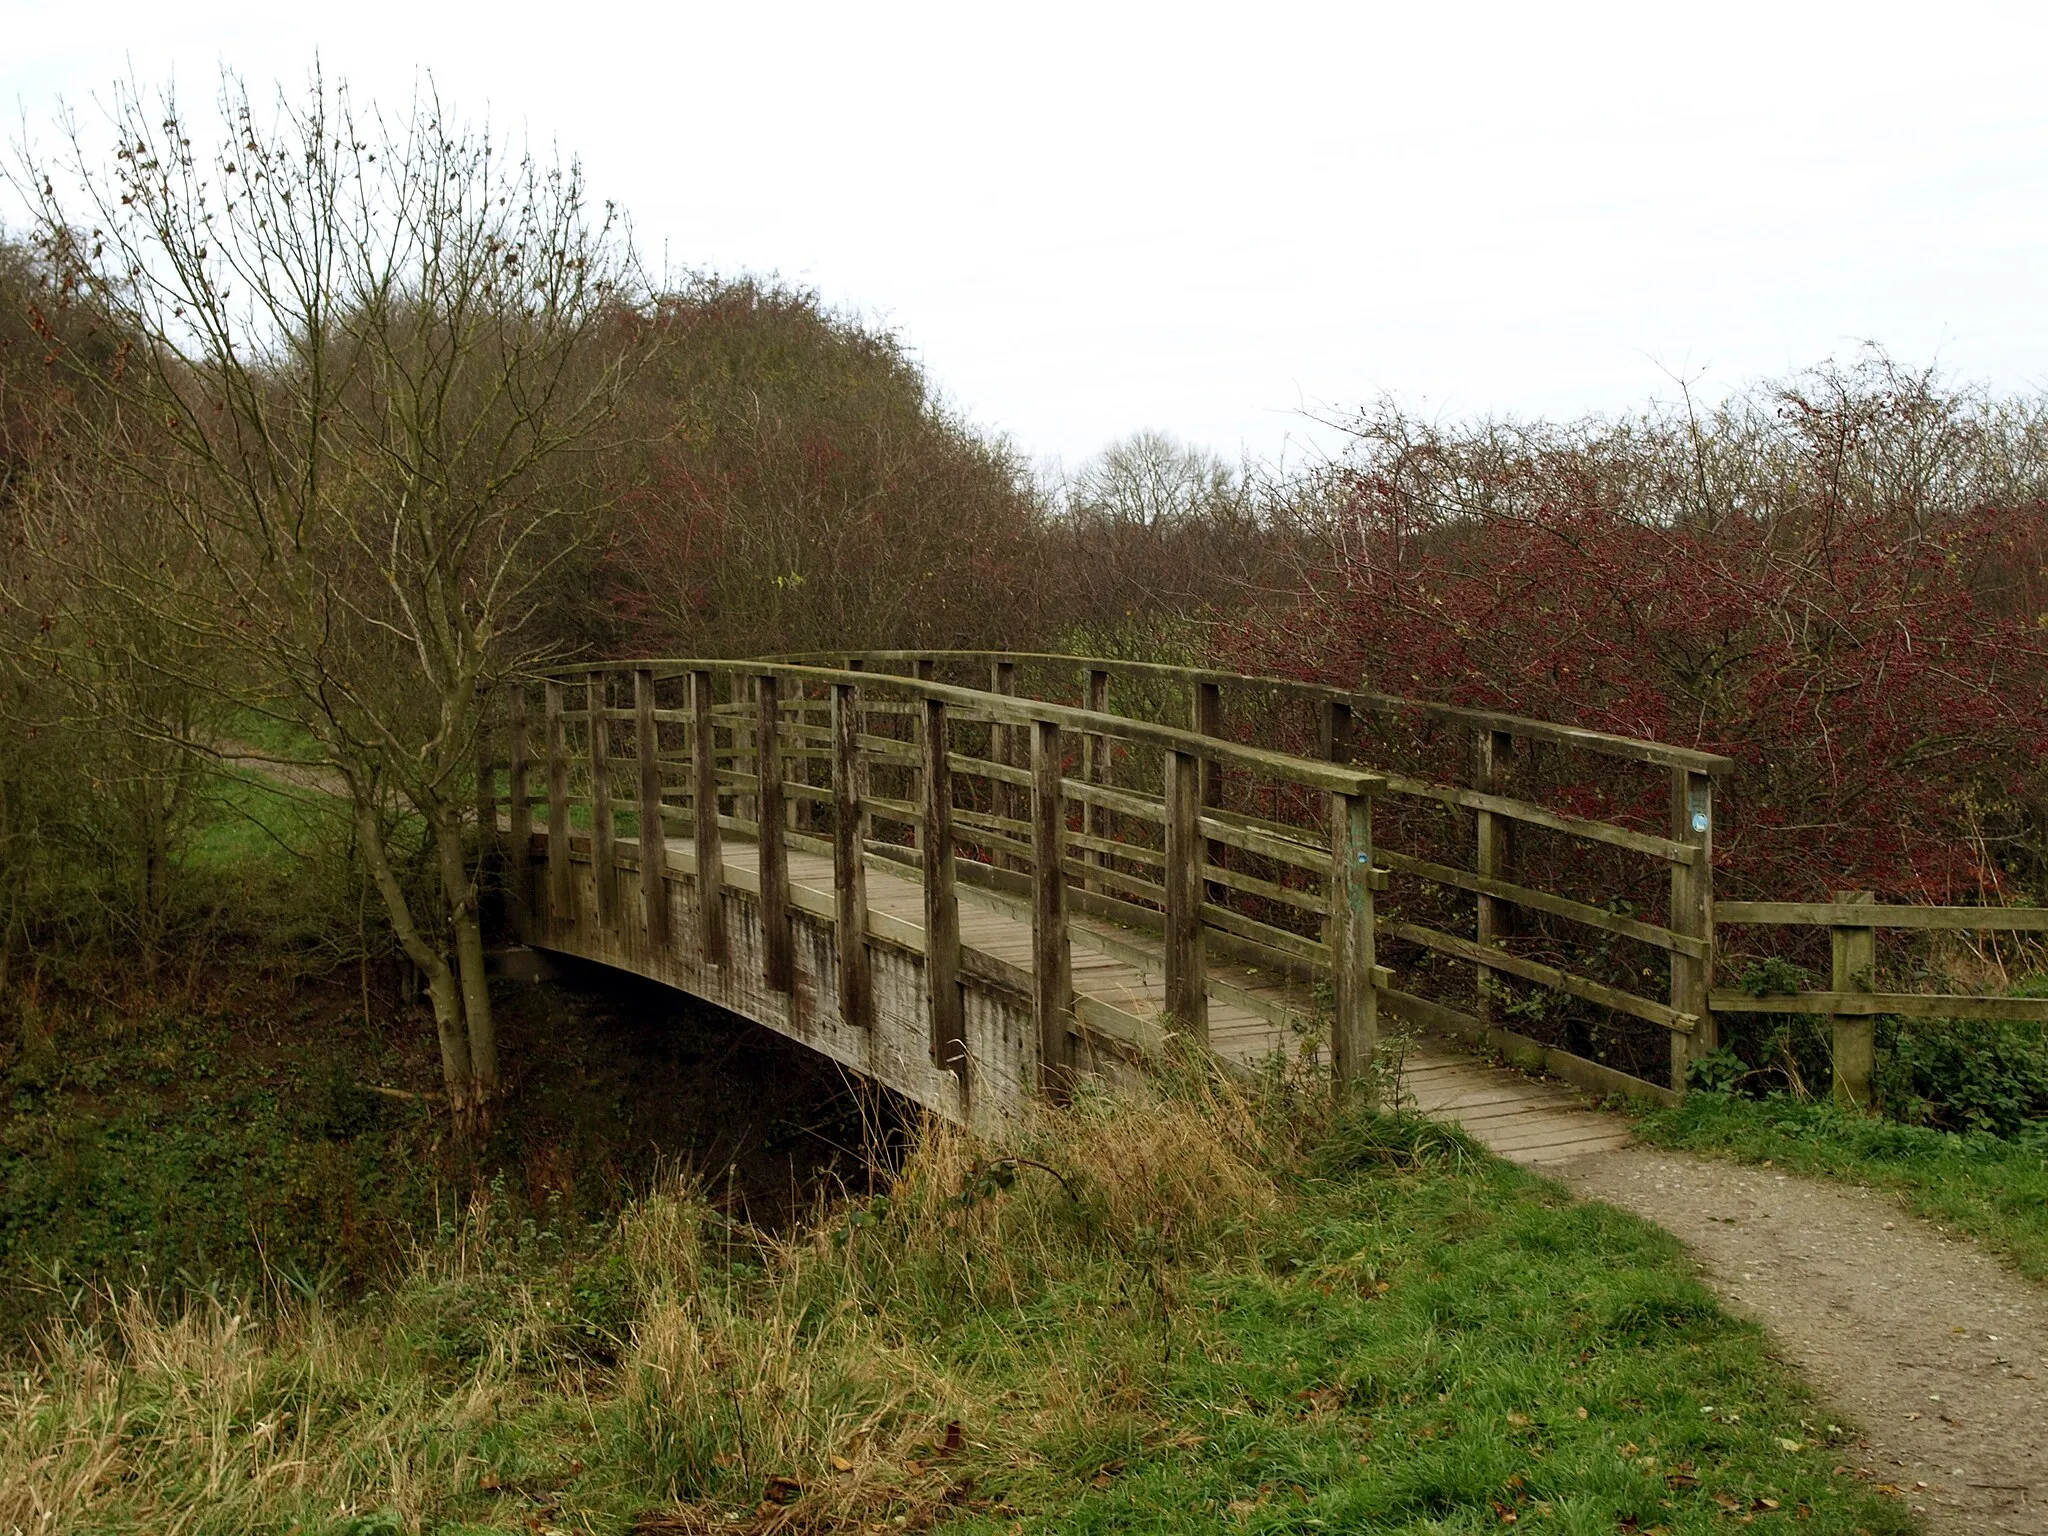 Photo showing: Footbridge on the old Hull to Hornsea railway trackbed, Withernwick, East Riding of Yorkshire, England. The bridge carries walkers/cyclists over Lambwath Stream on the old Hull to Hornsea railway trackbed. The track now forms part of a national trail.